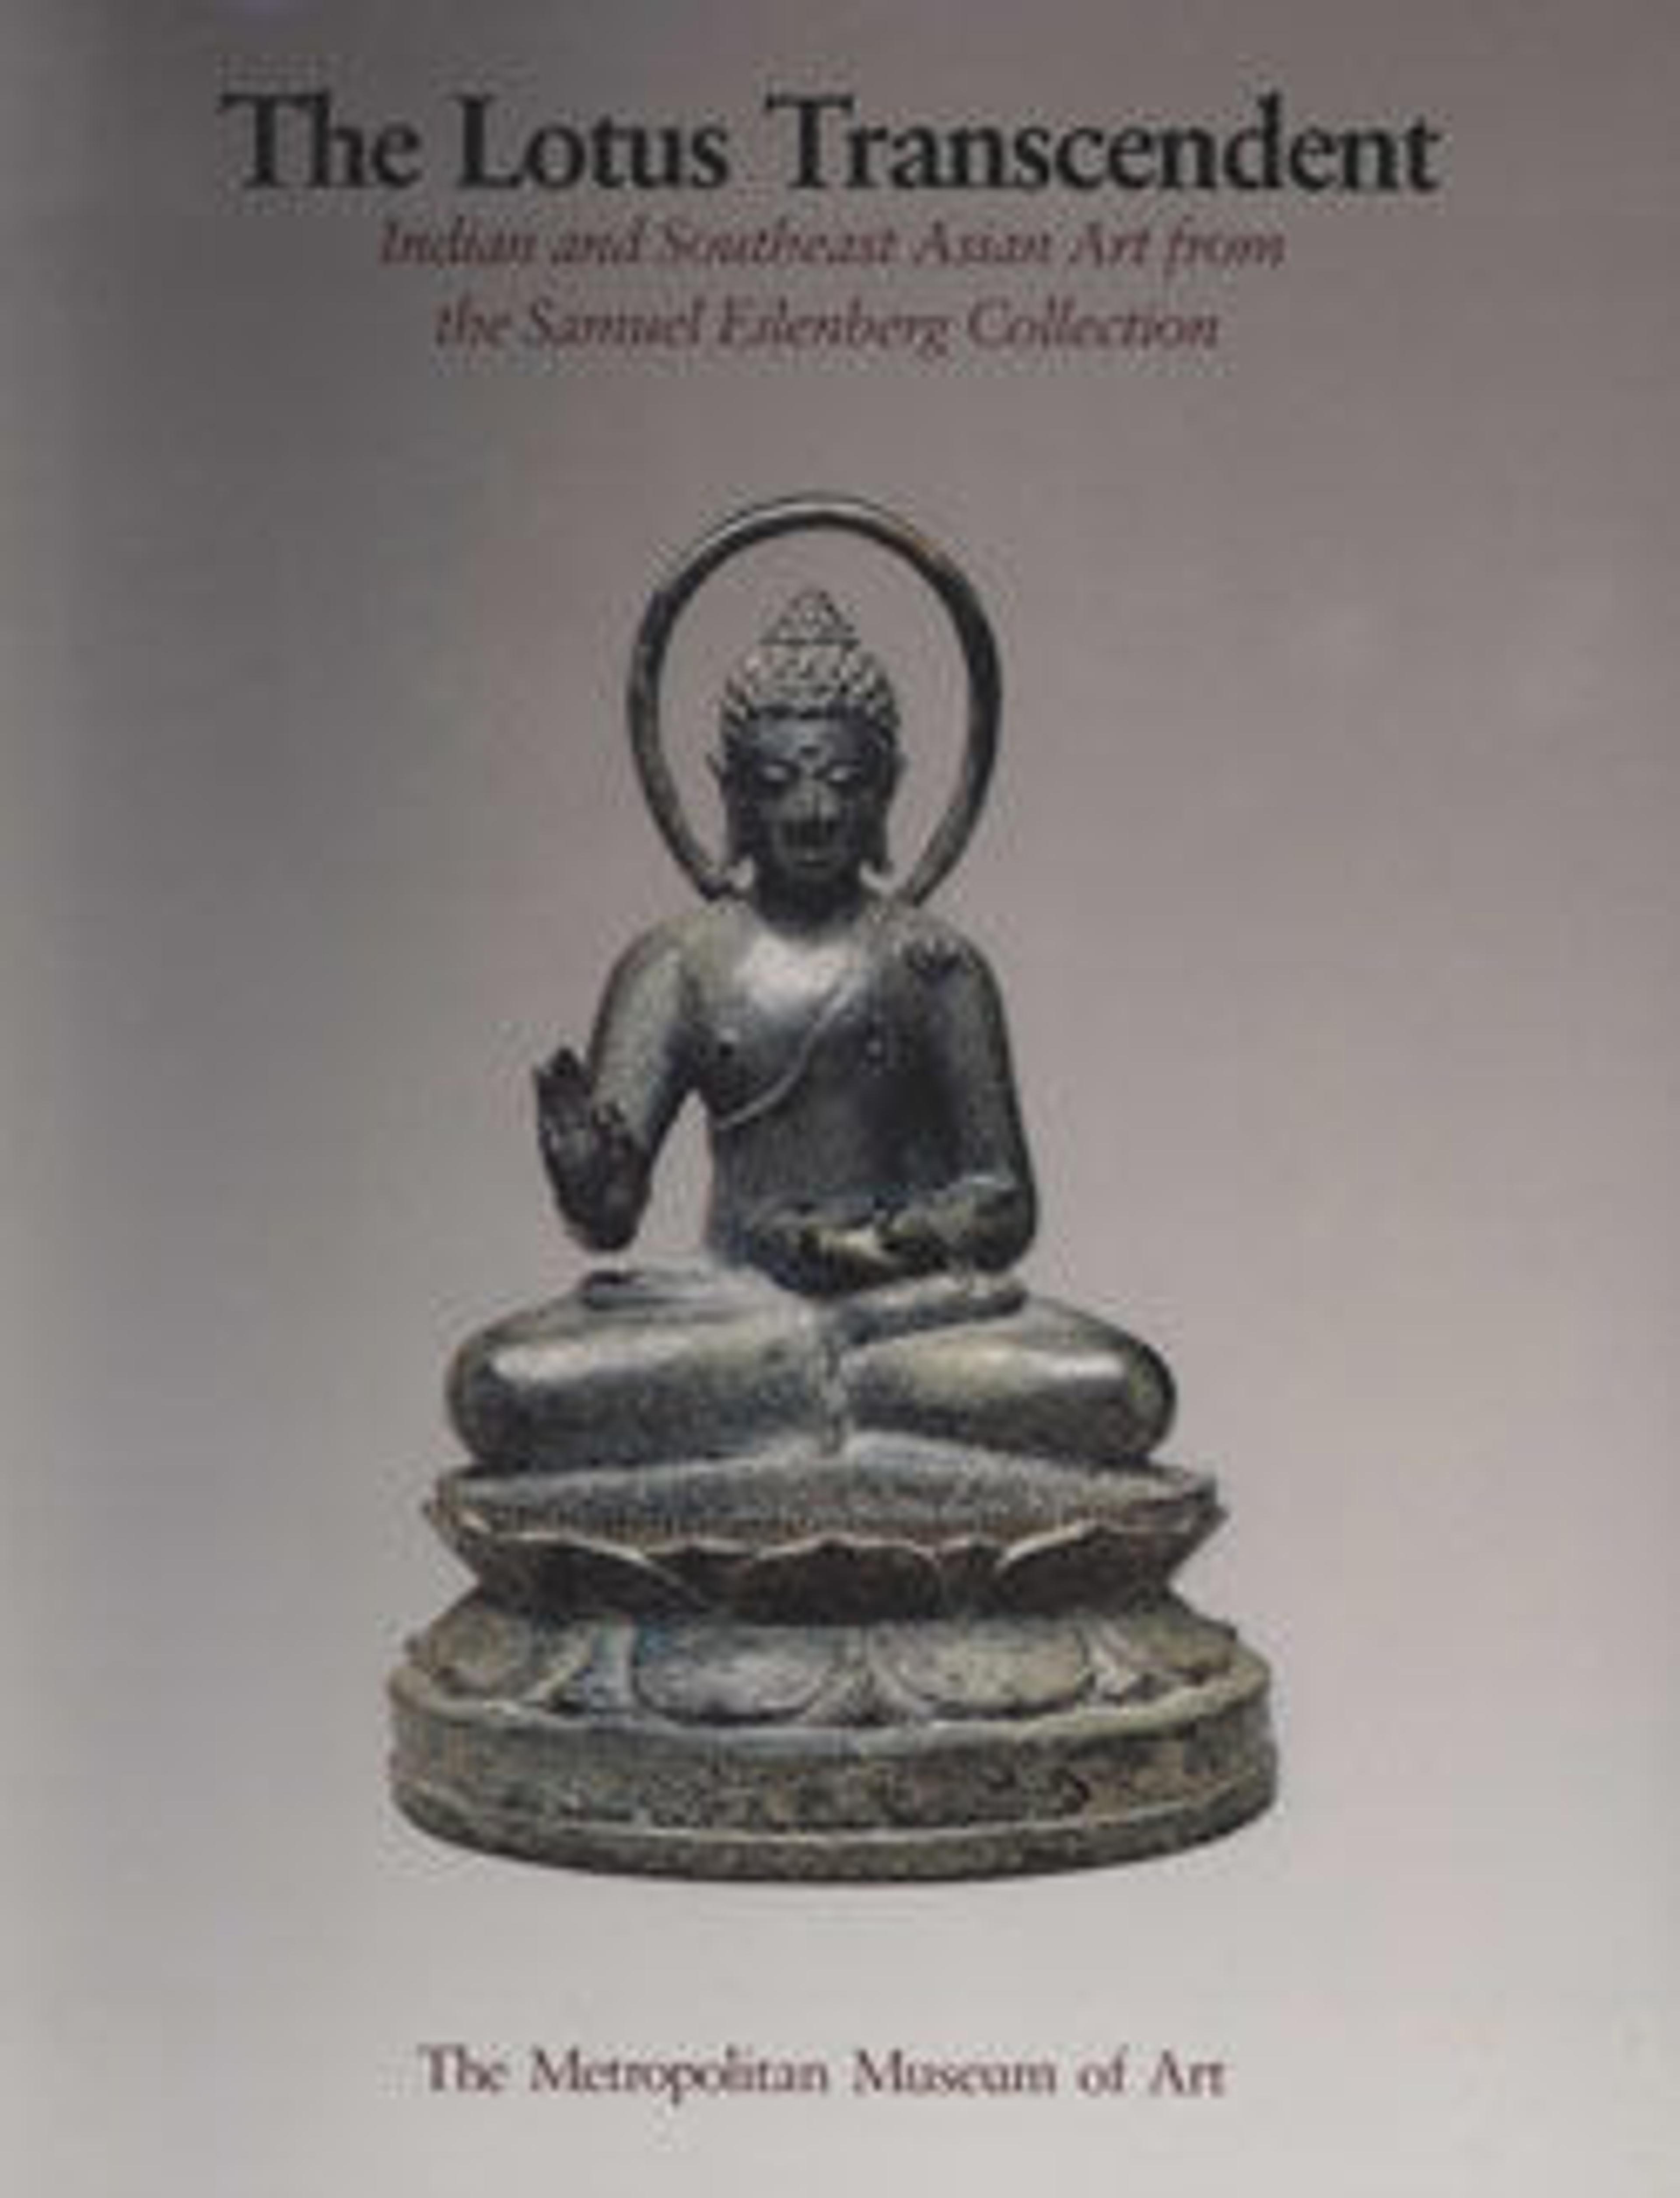 The Lotus Transcendent: Indian and Southeast Asian Art from the Samuel Eilenberg Collection